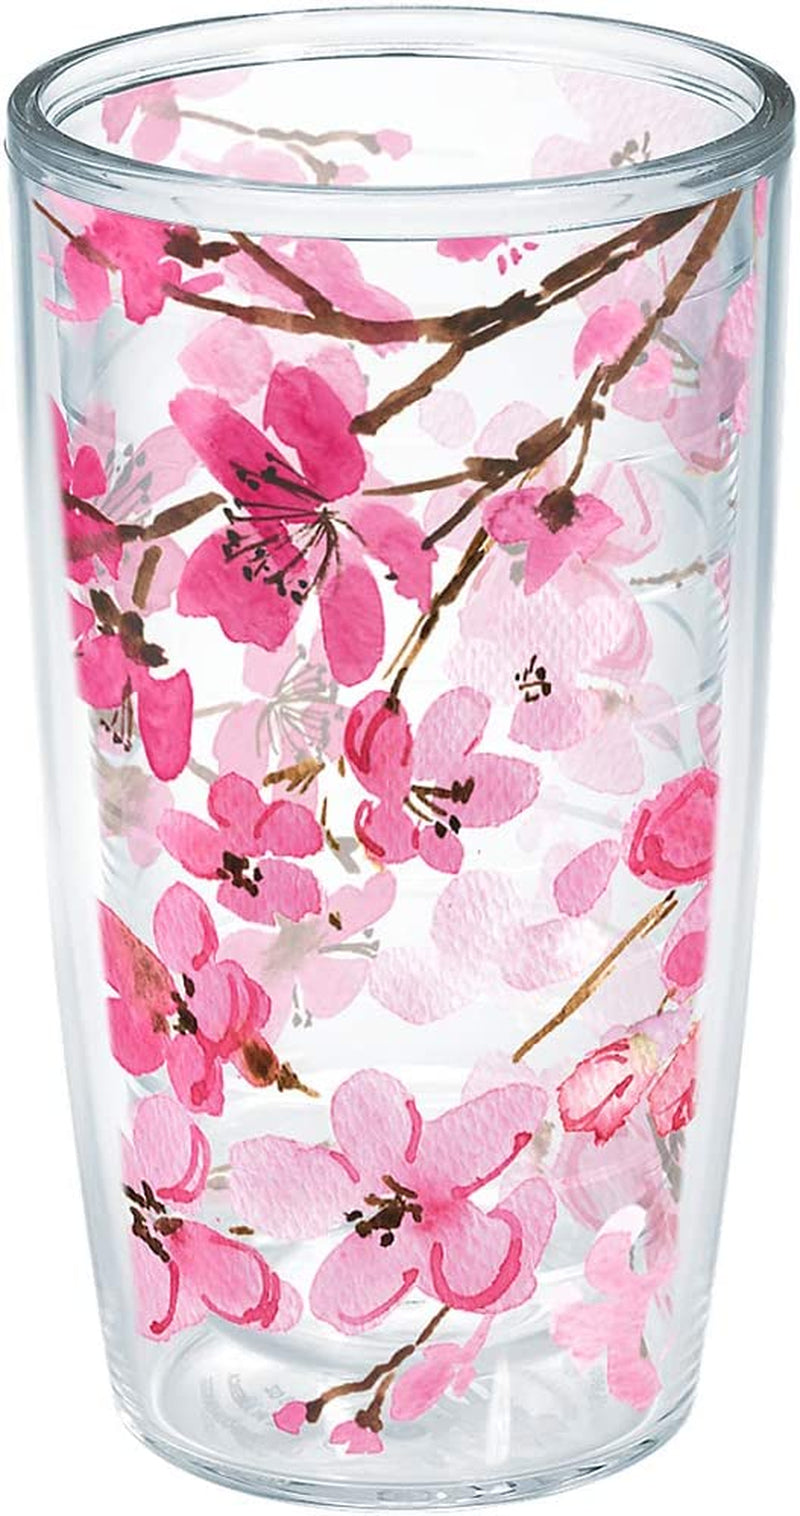 Tervis Made in USA Double Walled Sakura Japanese Cherry Blossom Insulated Tumbler Cup Keeps Drinks Cold & Hot, 24Oz, Classic - Lidded Home & Garden > Kitchen & Dining > Tableware > Drinkware Tervis Classic - Unlidded 16oz 